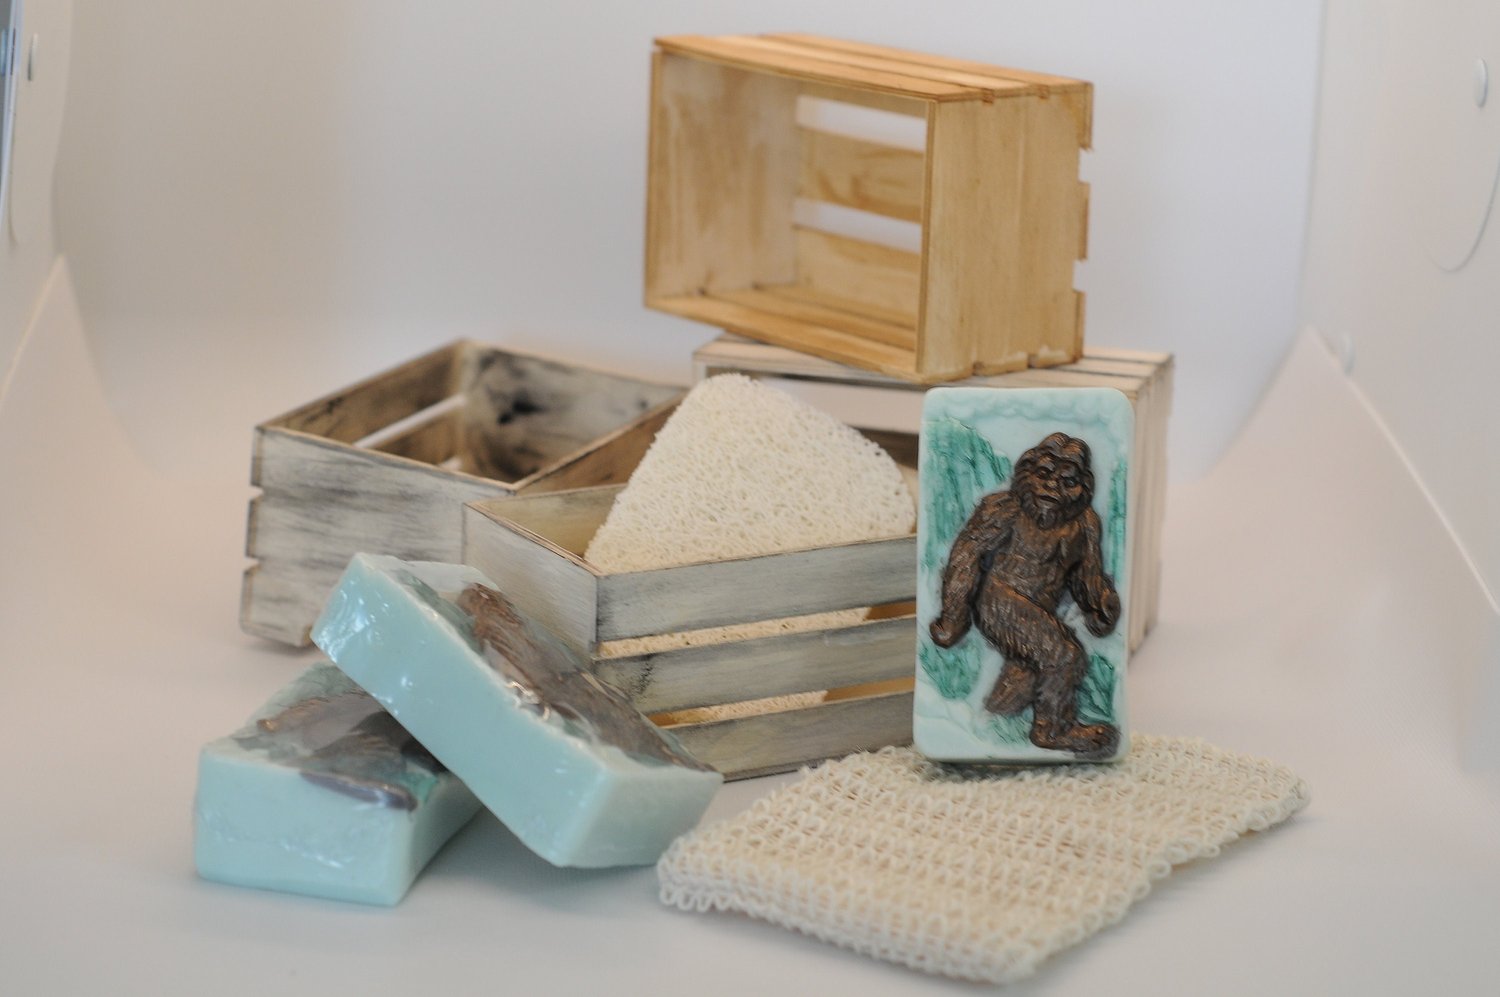 Sasquatch Bigfoot Body Wash Soap And Body Lotion Gift Set Travel Set  Collectible